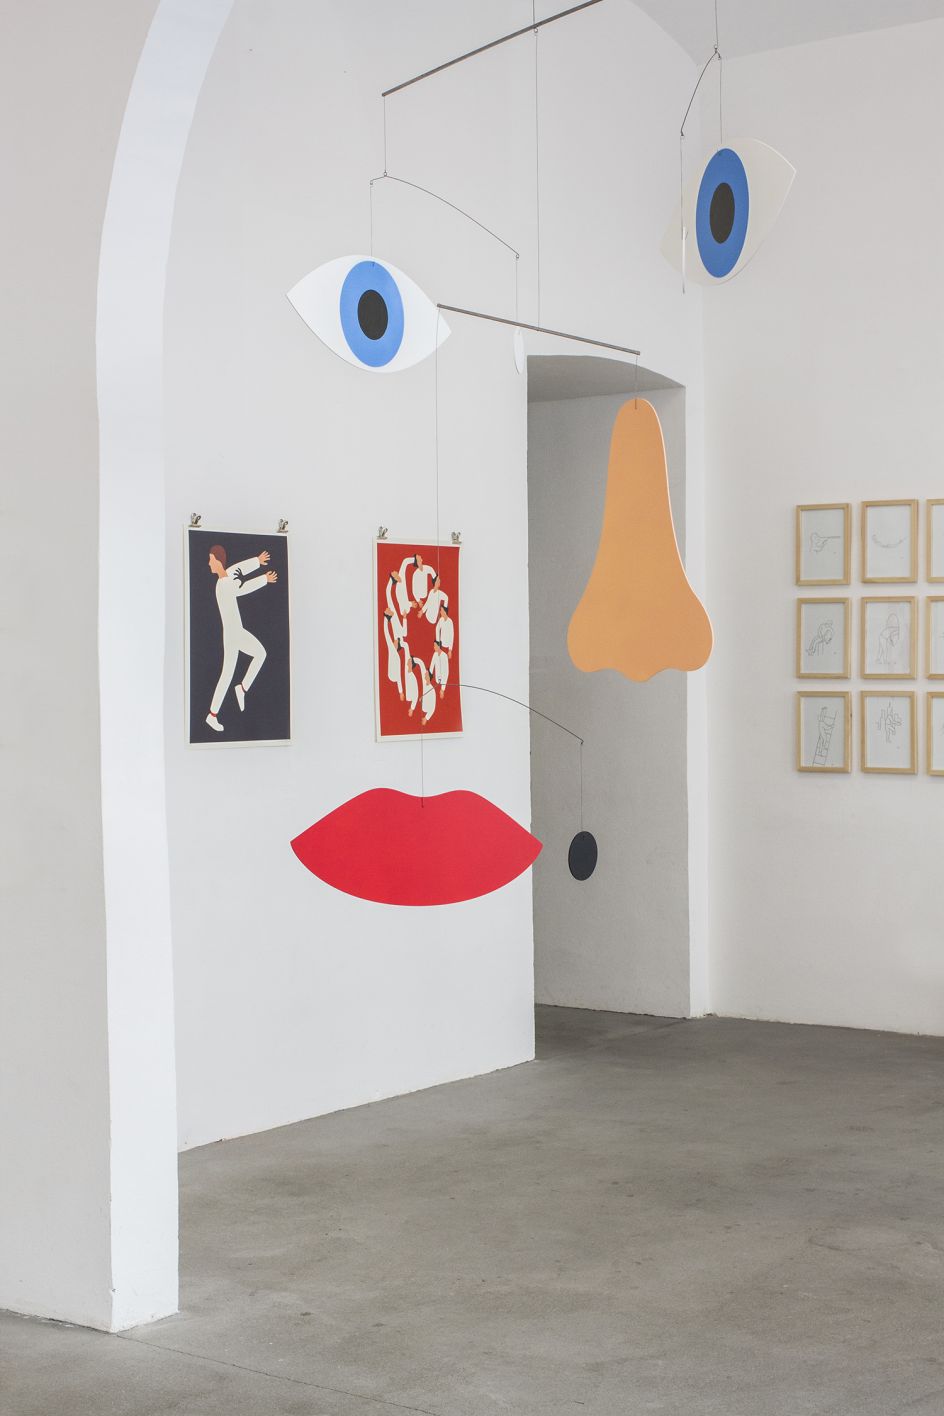 Portraits, Process and Installation Views of ‘Alternate Realities’ at T/abor Gallery in Vienna